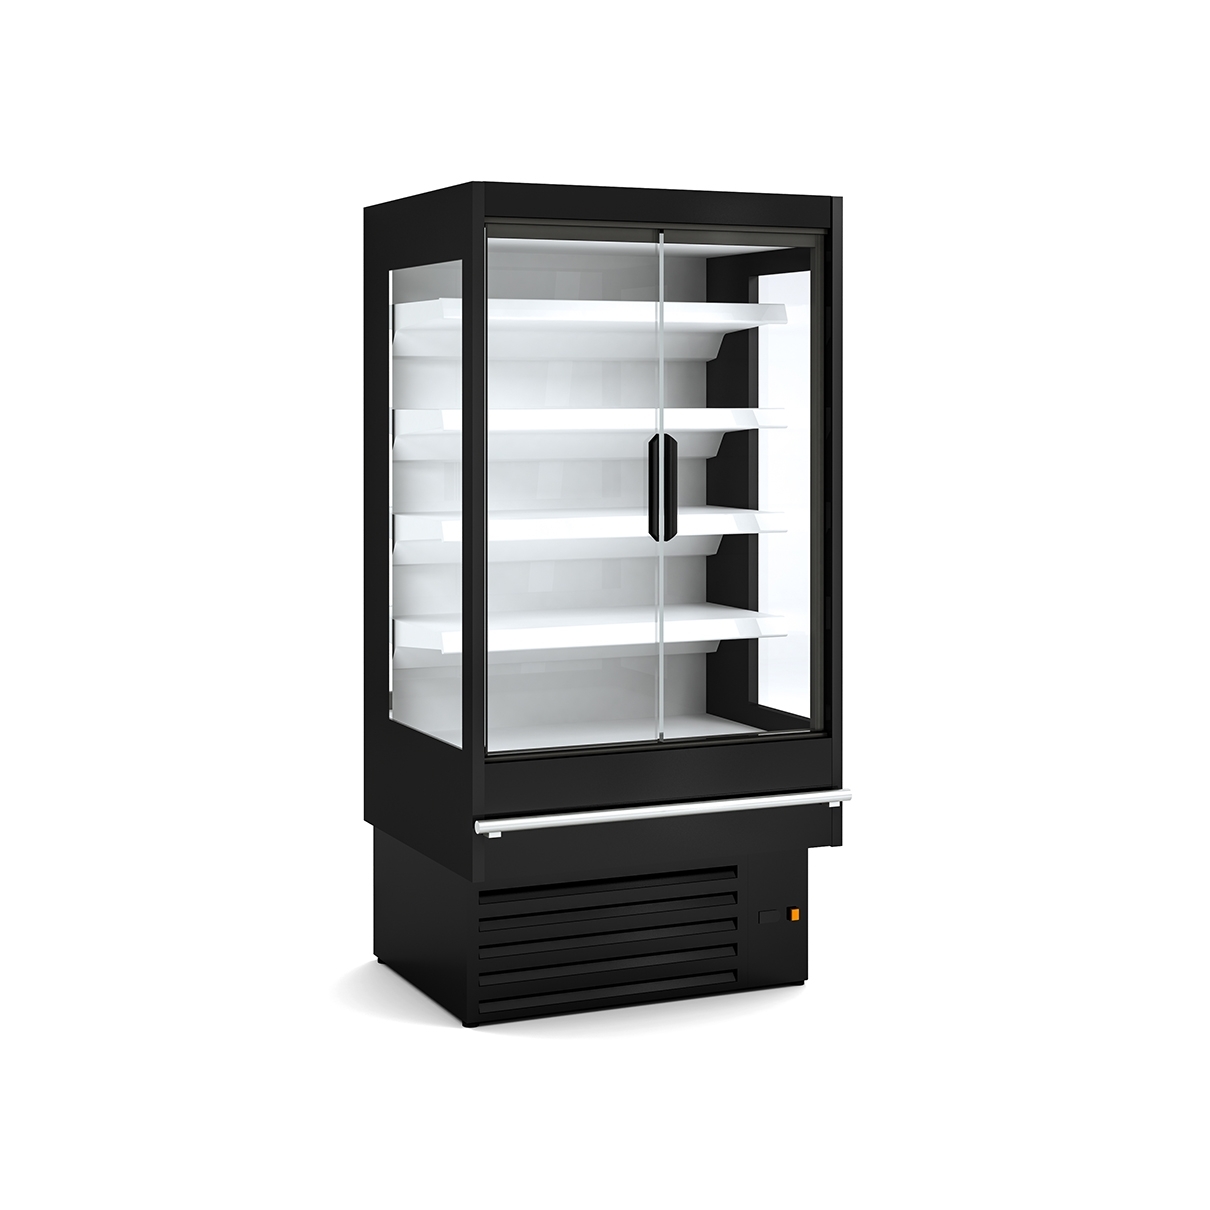 REFRIGERATED WALL-MOUNTED DISPLAY CABINET HDG0 M1